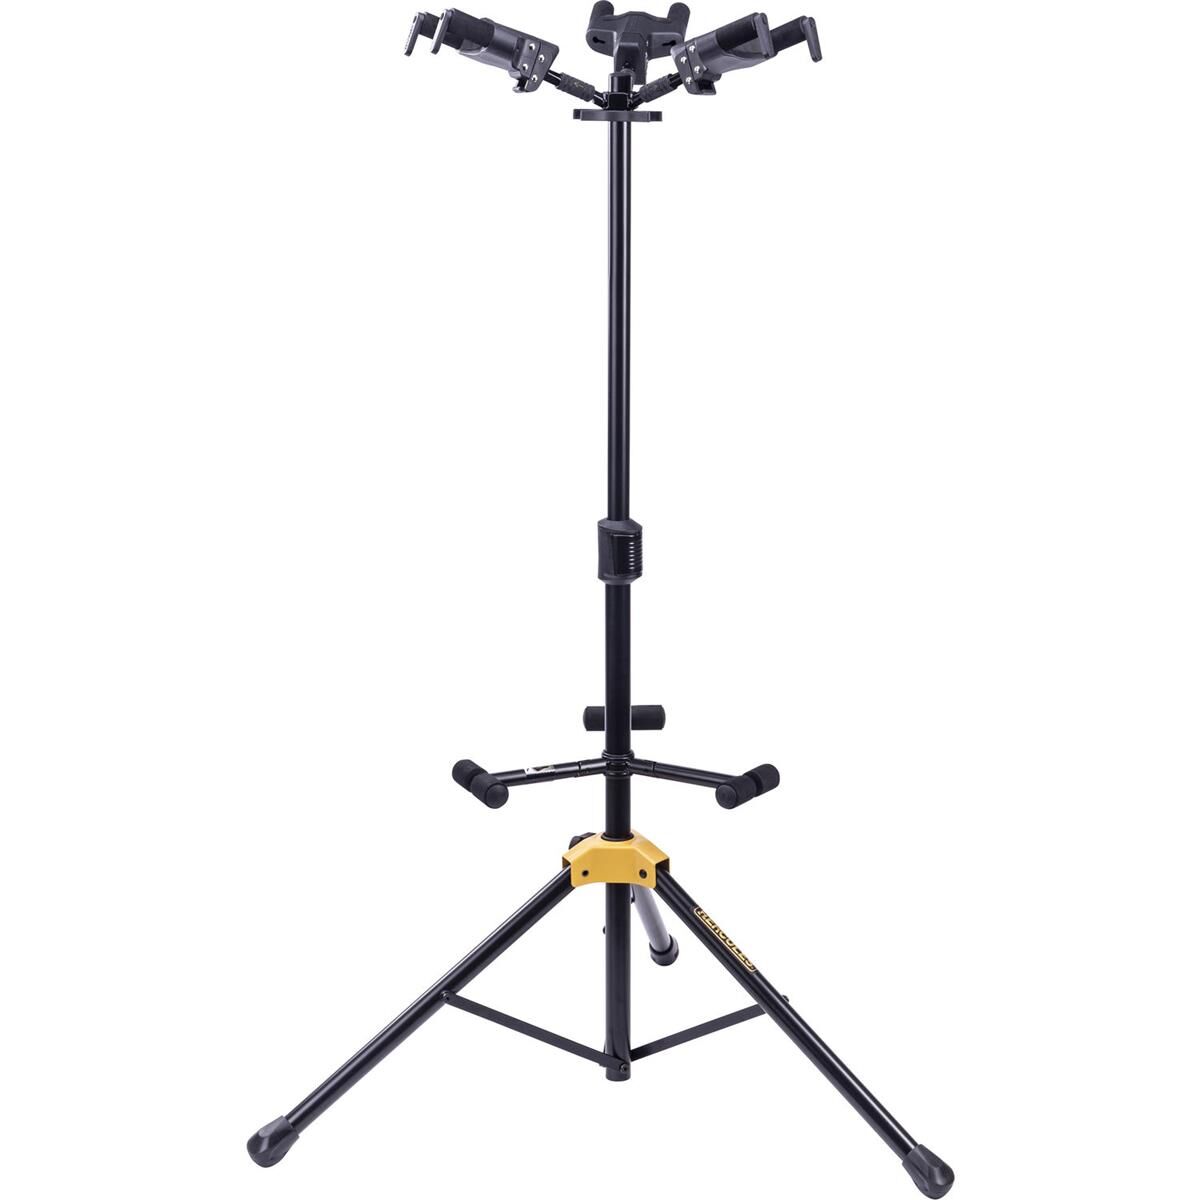 Hercules Stands GS432B PLUS Auto-Grip Triple Guitar Stand with Foldable Backrest